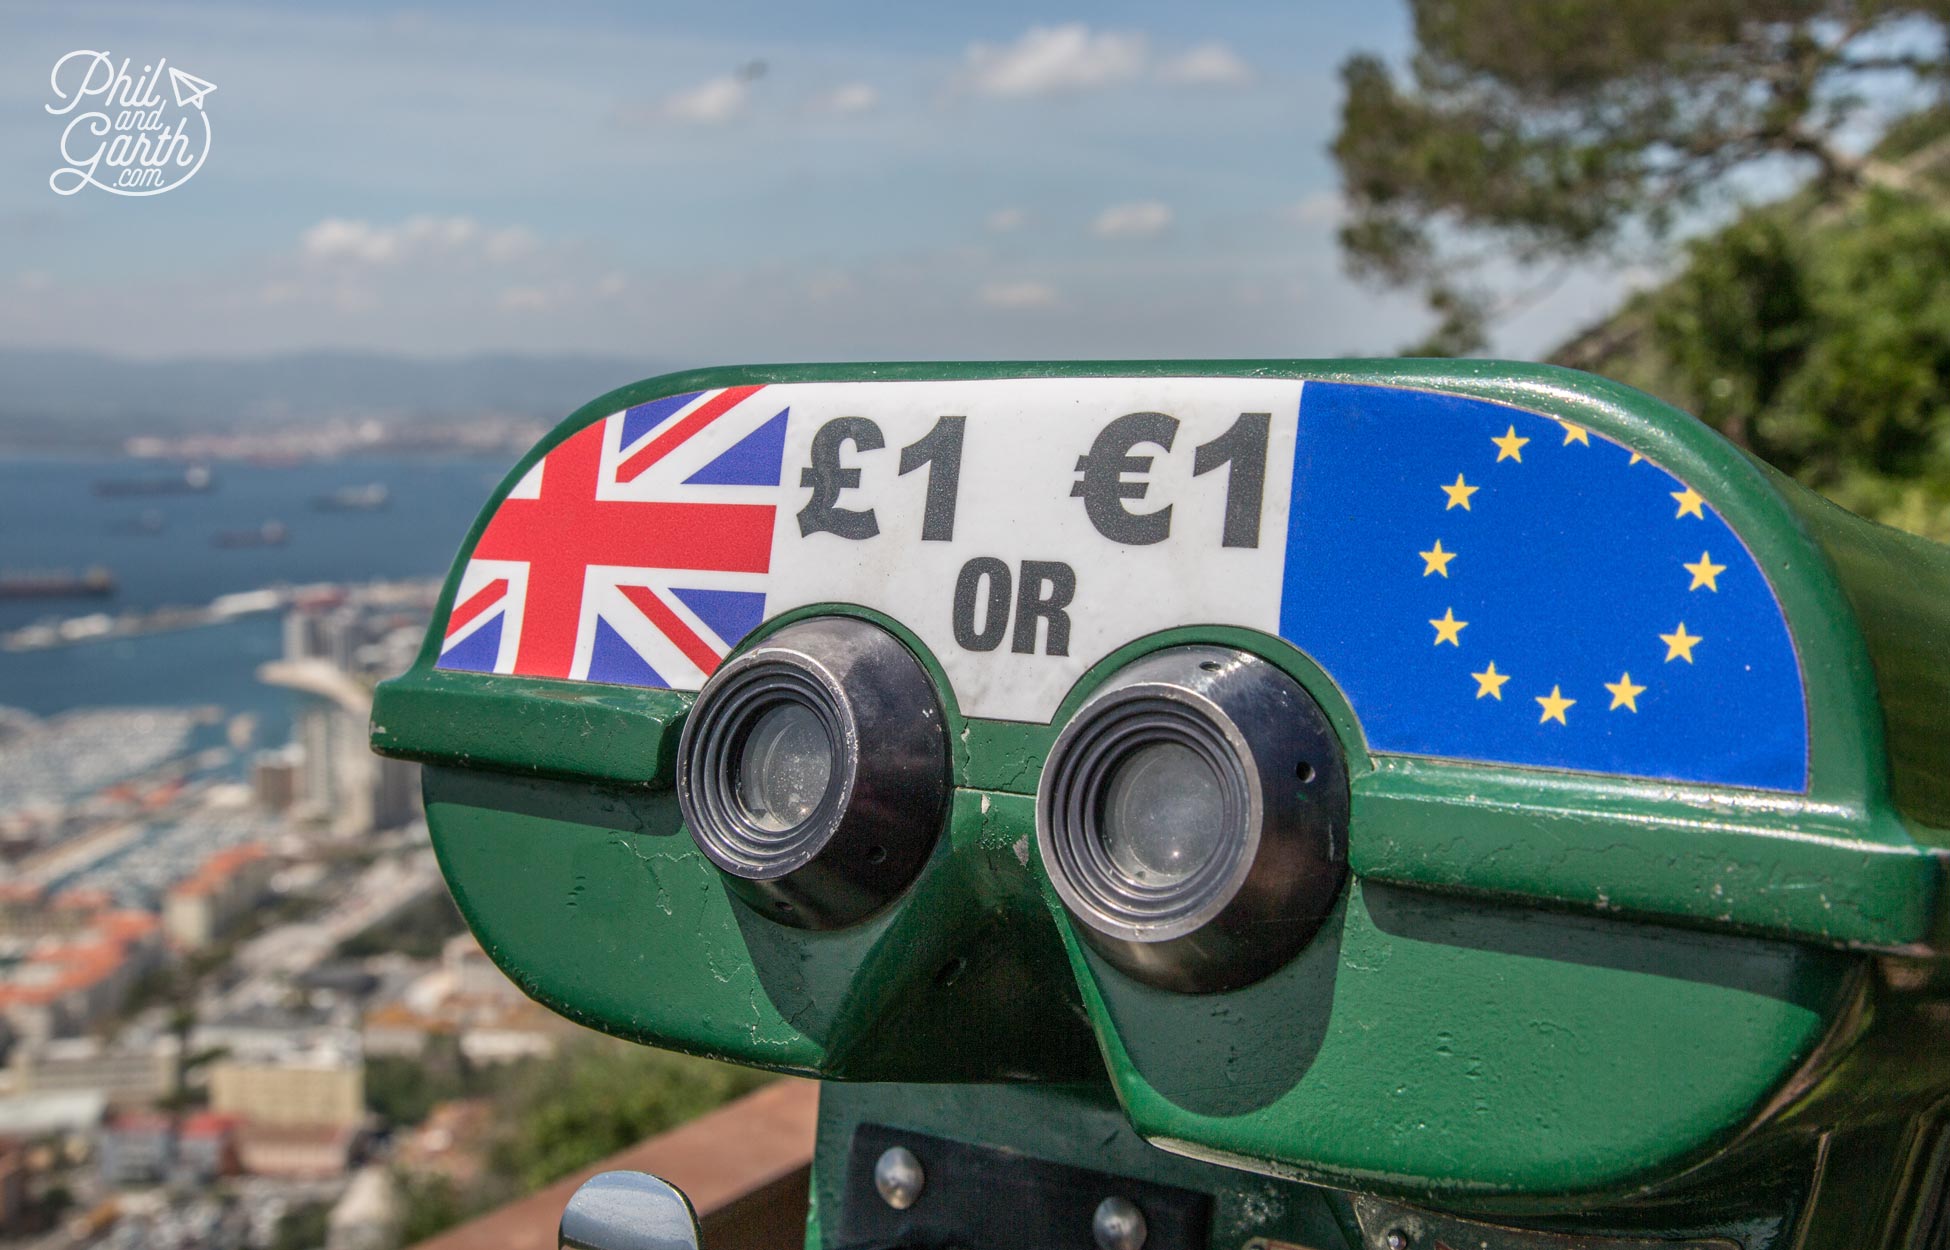 Gibraltar voted overwhelmingly to stay in EU (96%) in 2016's UK European Union membership referendum